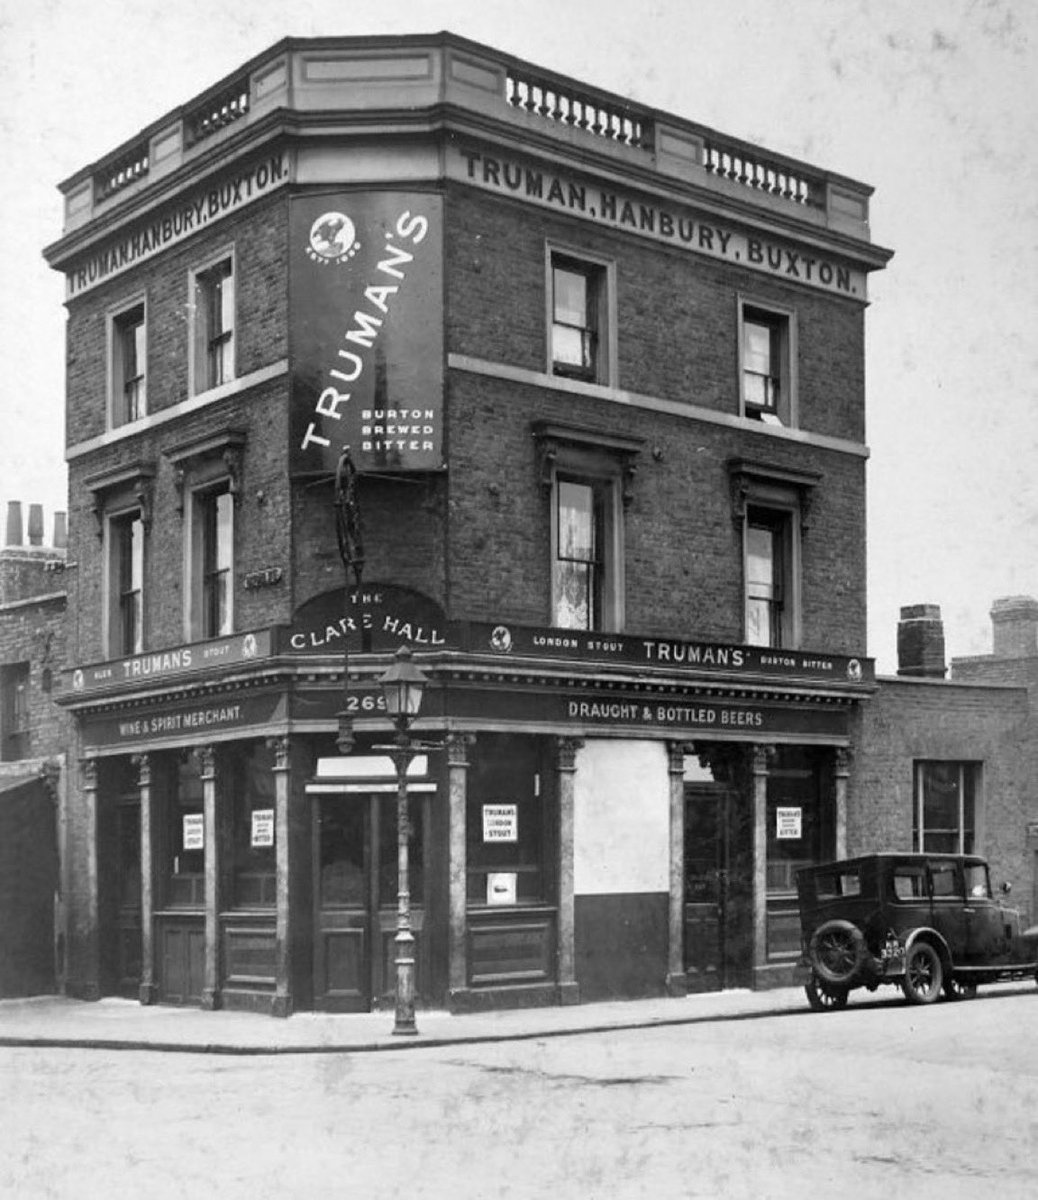 The Clare Hall pub in Stepney. By 1983, it had been renamed ‘The Pride of Stepney’ - but as we all know, pride comes before a fall, and it closed its doors in 1999 and is now a fried chicken takeaway... #Eastend #pubs #History